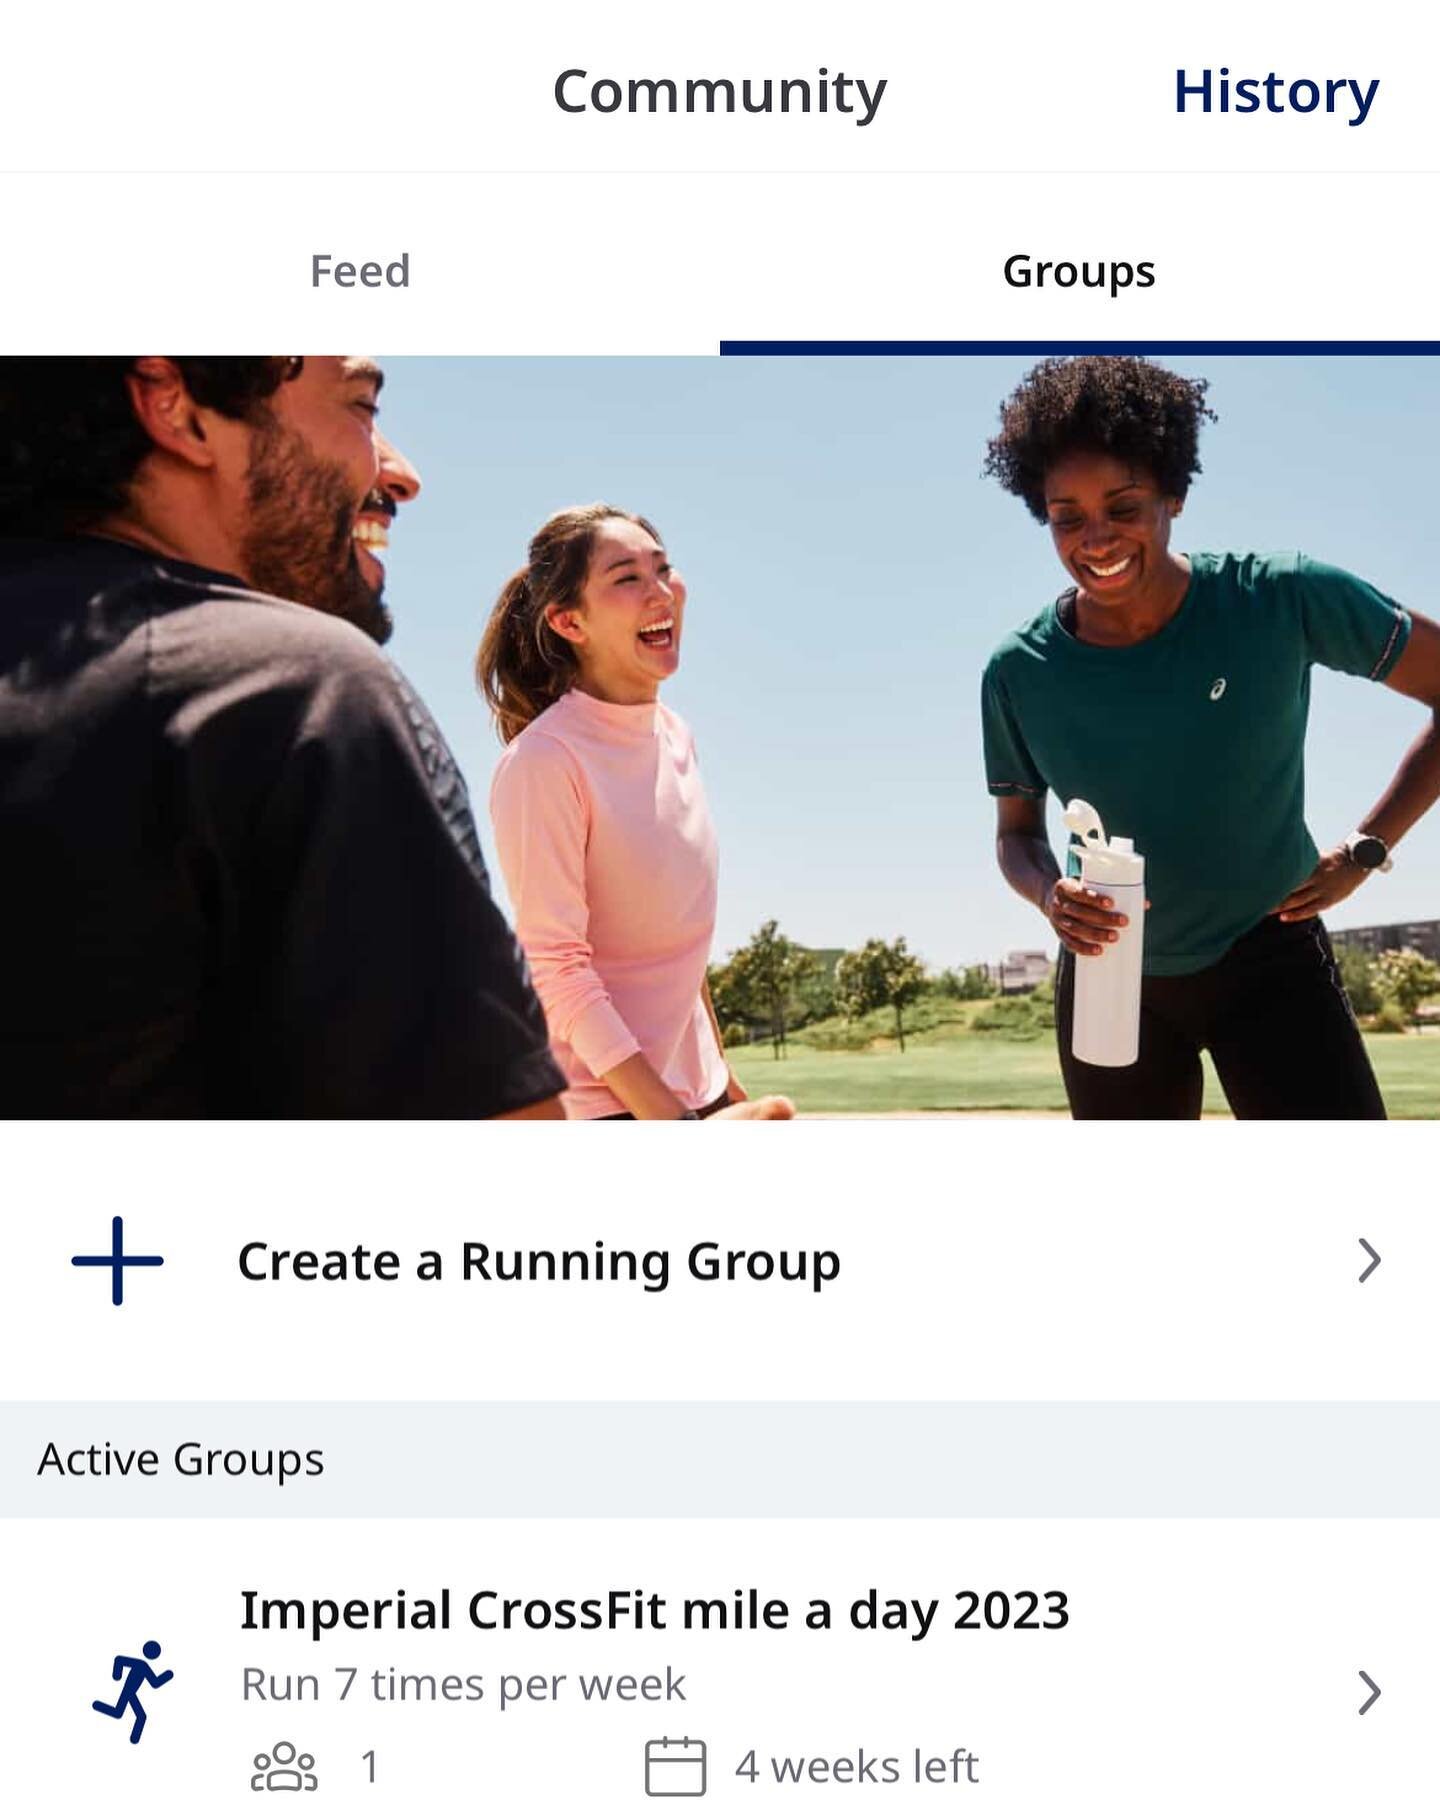 Mile a day May starts today! 🏃🏿&zwj;♀️🏃🏼&zwj;♂️
If you&rsquo;d like to participate&hellip;
&bull;download the RunKeeper app
&bull;friend request Danielle Depew @danielle_depew 
&bull;accept the challenge invite when it&rsquo;s sent to you
&bull;r